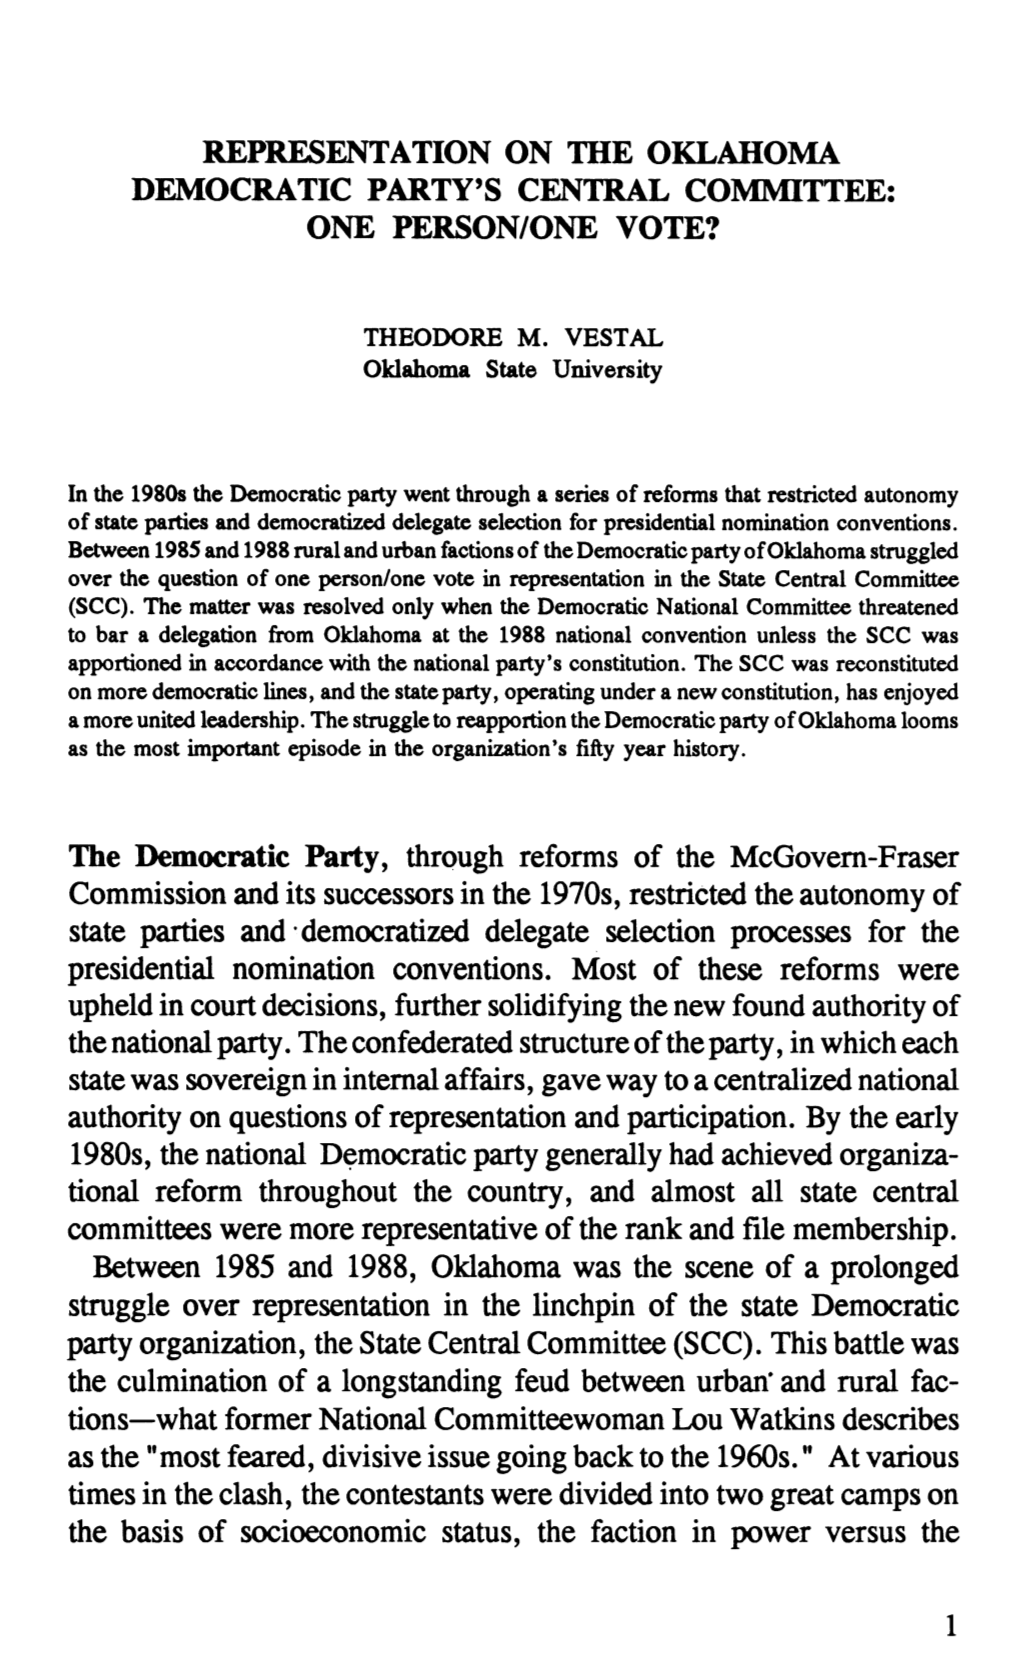 Representation on the Oklahoma Democratic Party's Central Committee: One Person/One Vote?